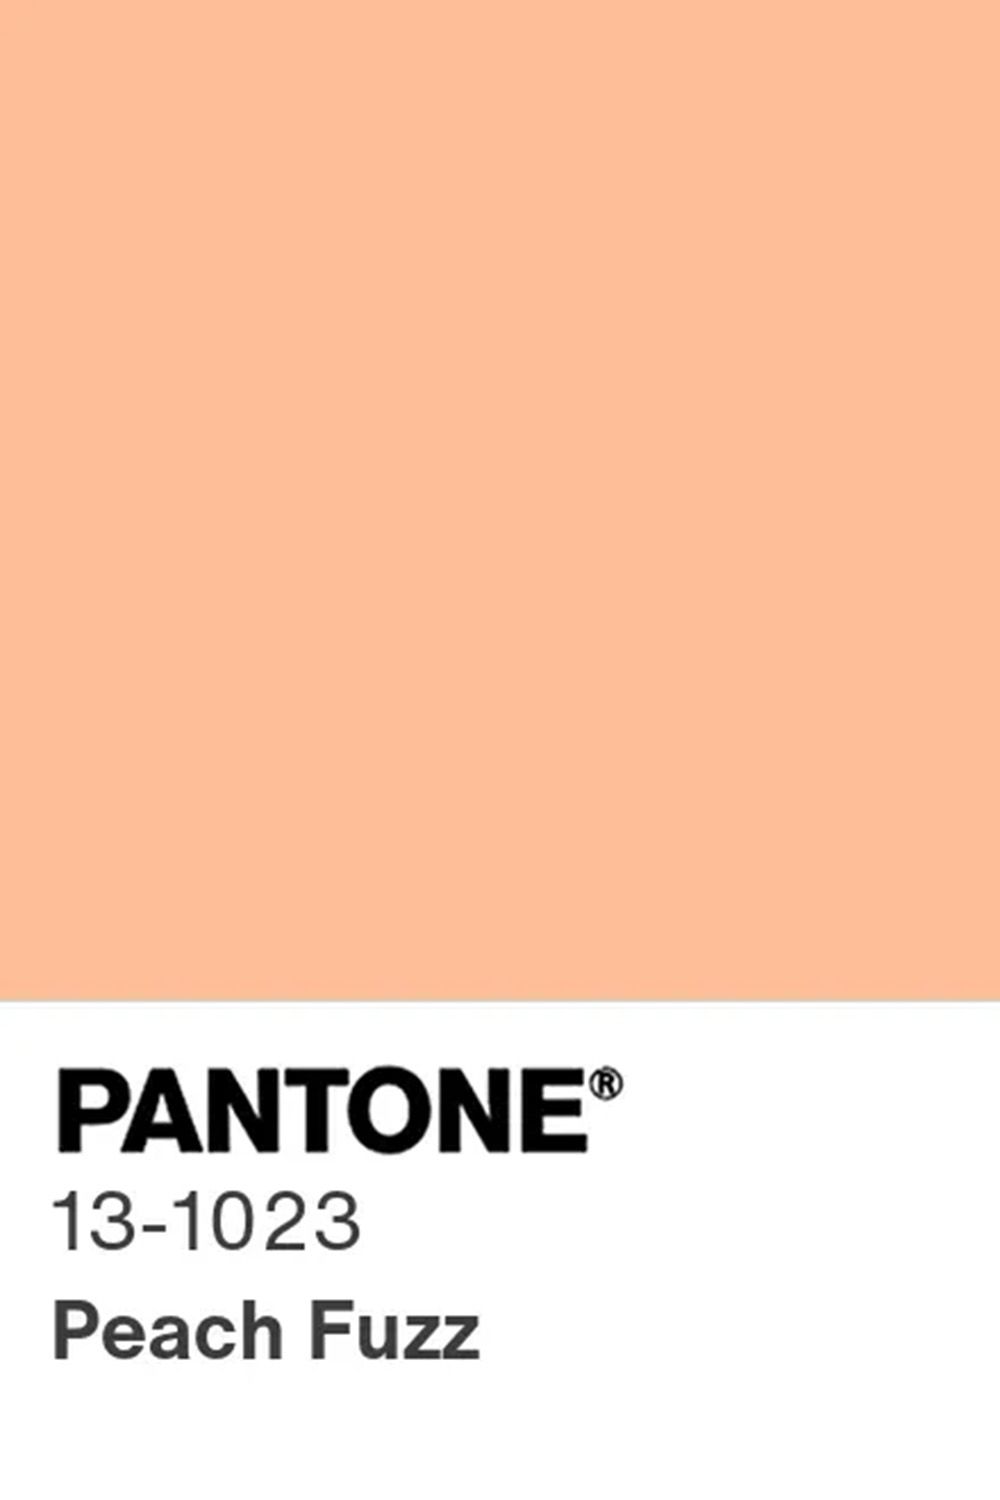 Every color of the year we know so far